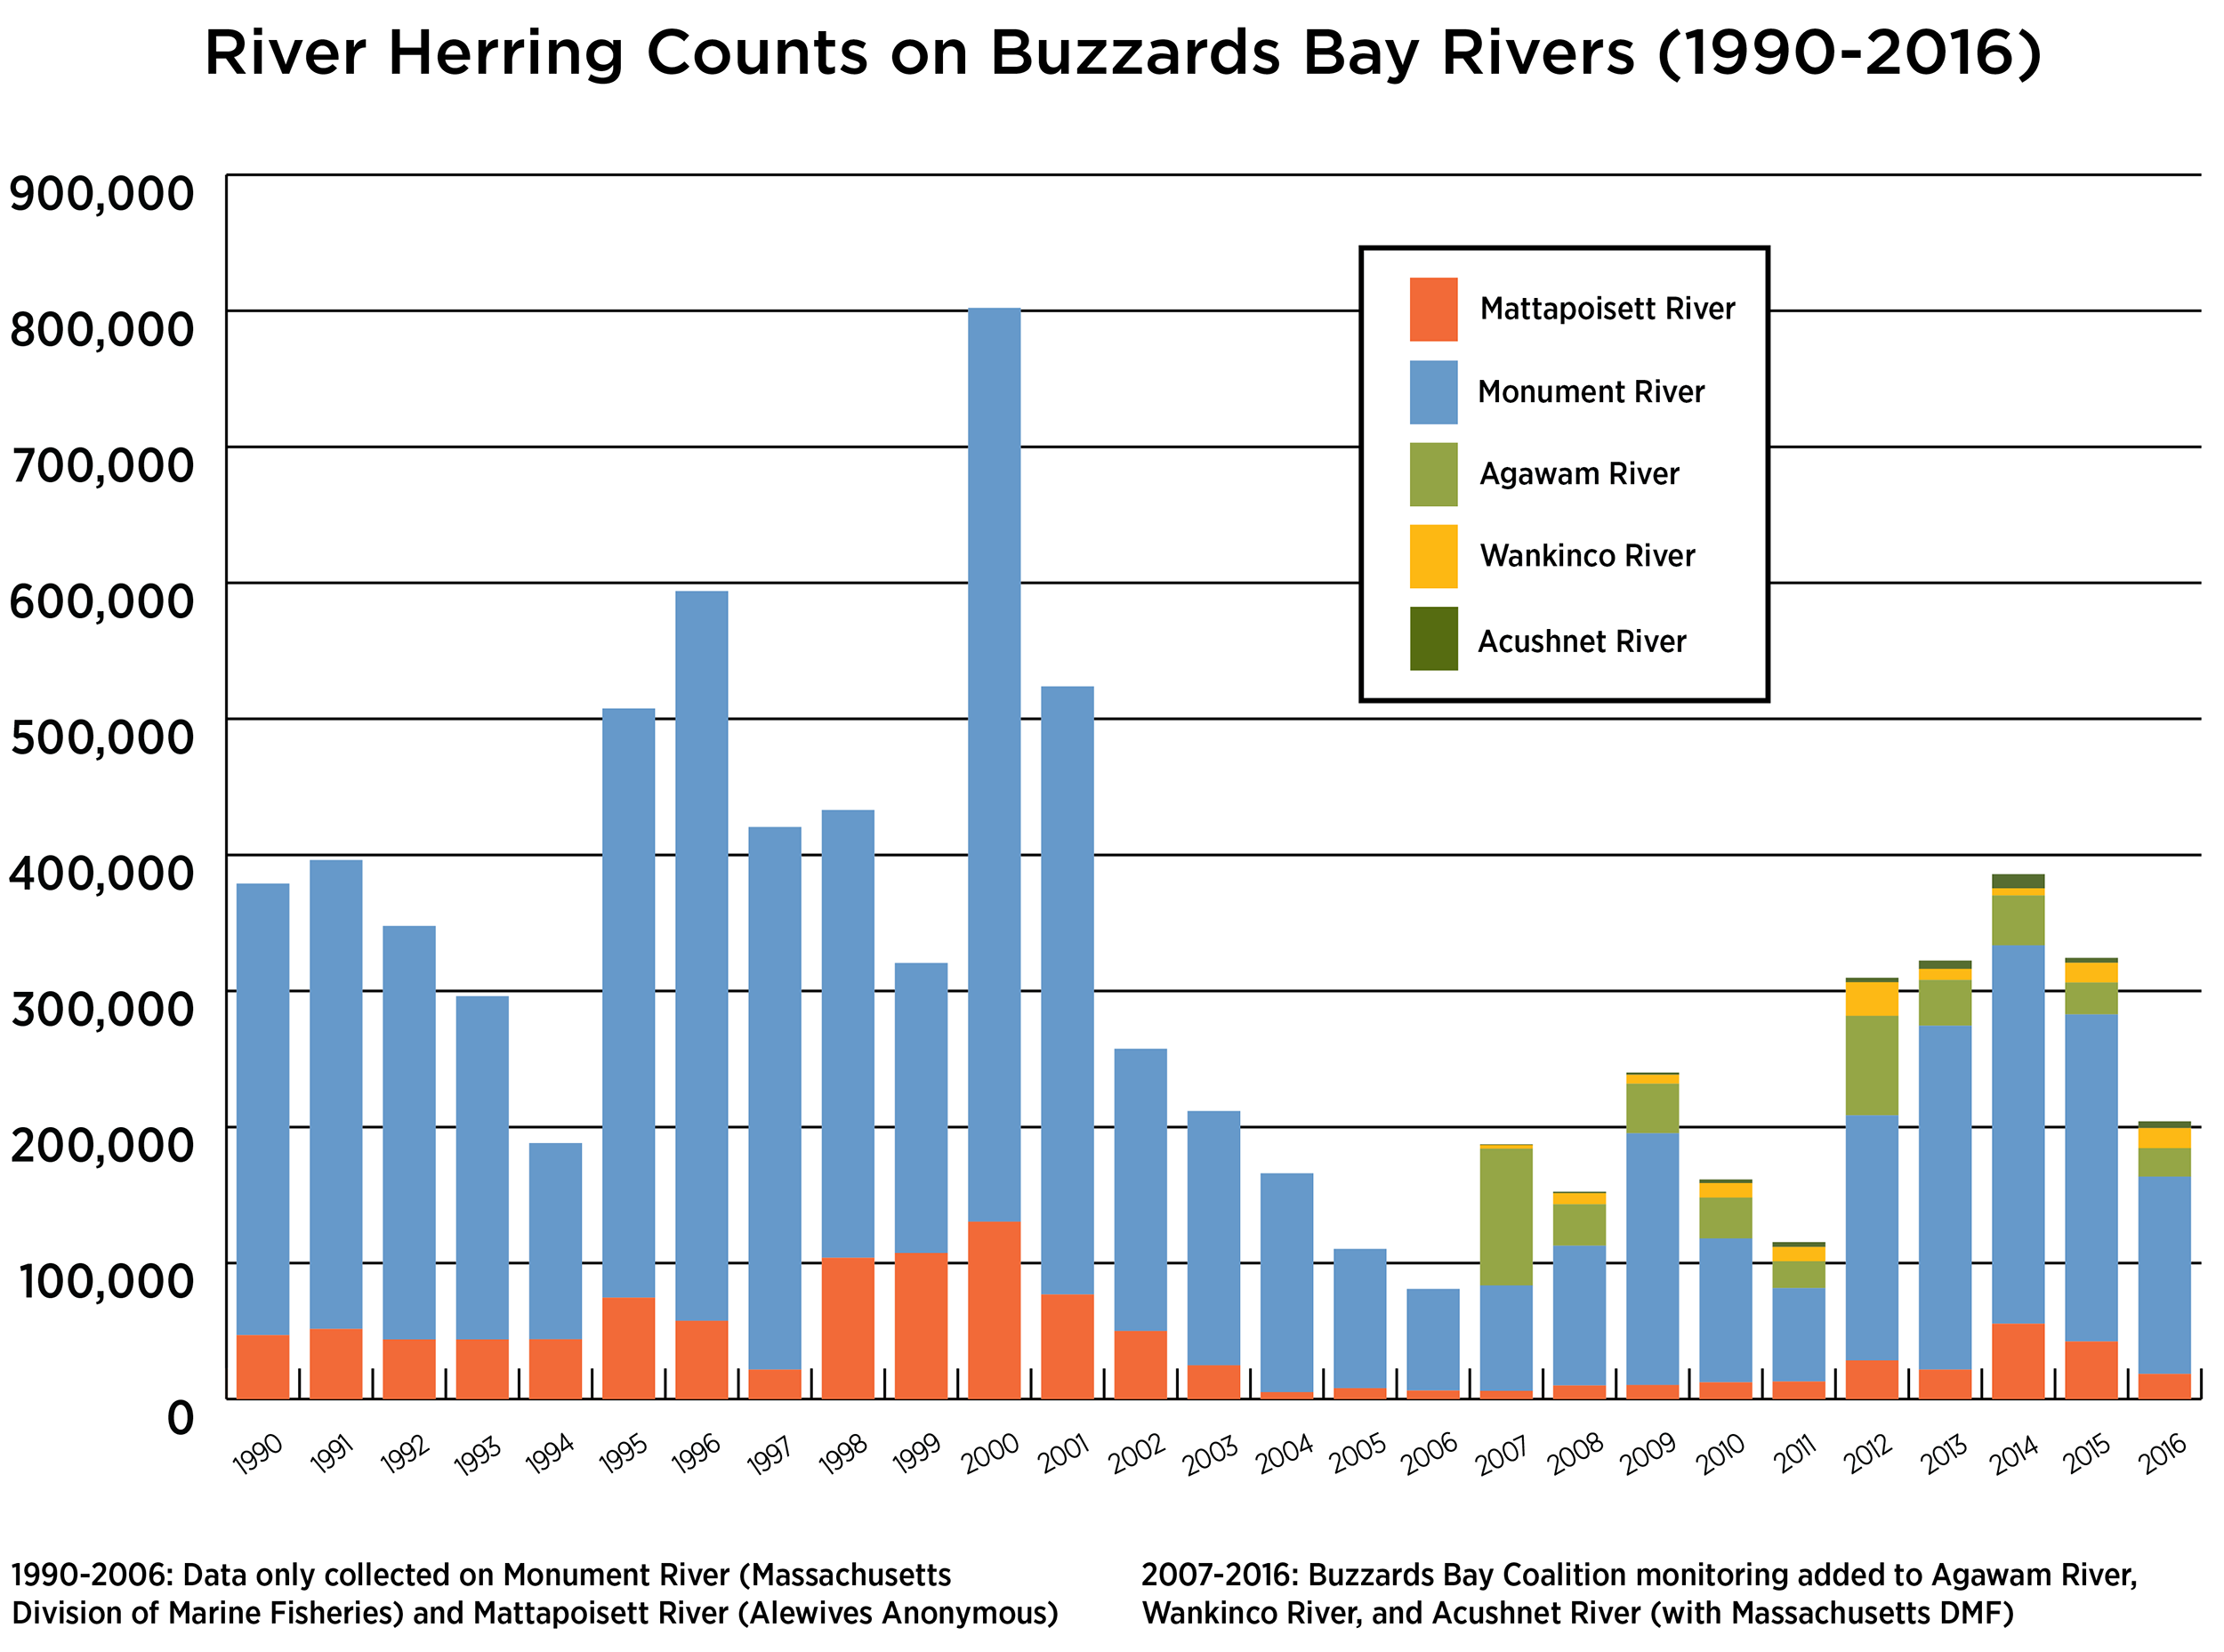 graph showing river herring populations in Buzzards Bay from 1990-2016